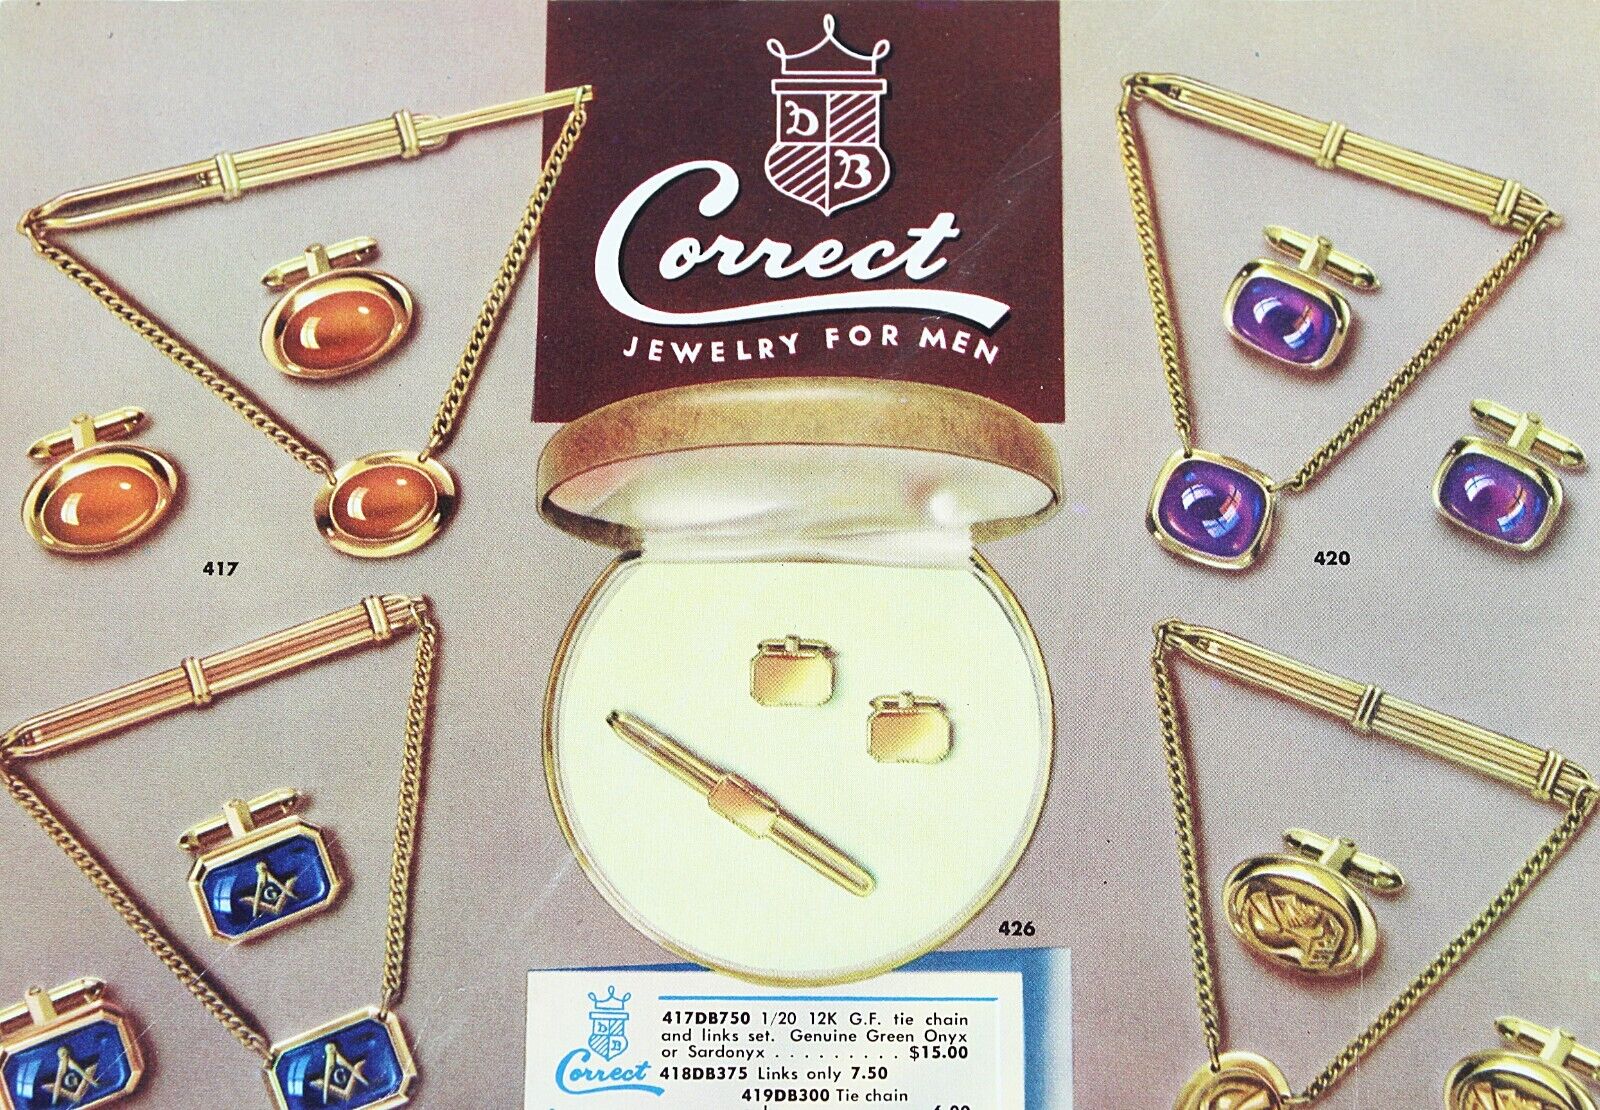 Vintage 1952 DB CORRECT Jewelry For Men Print Ad in Color with Prices #2